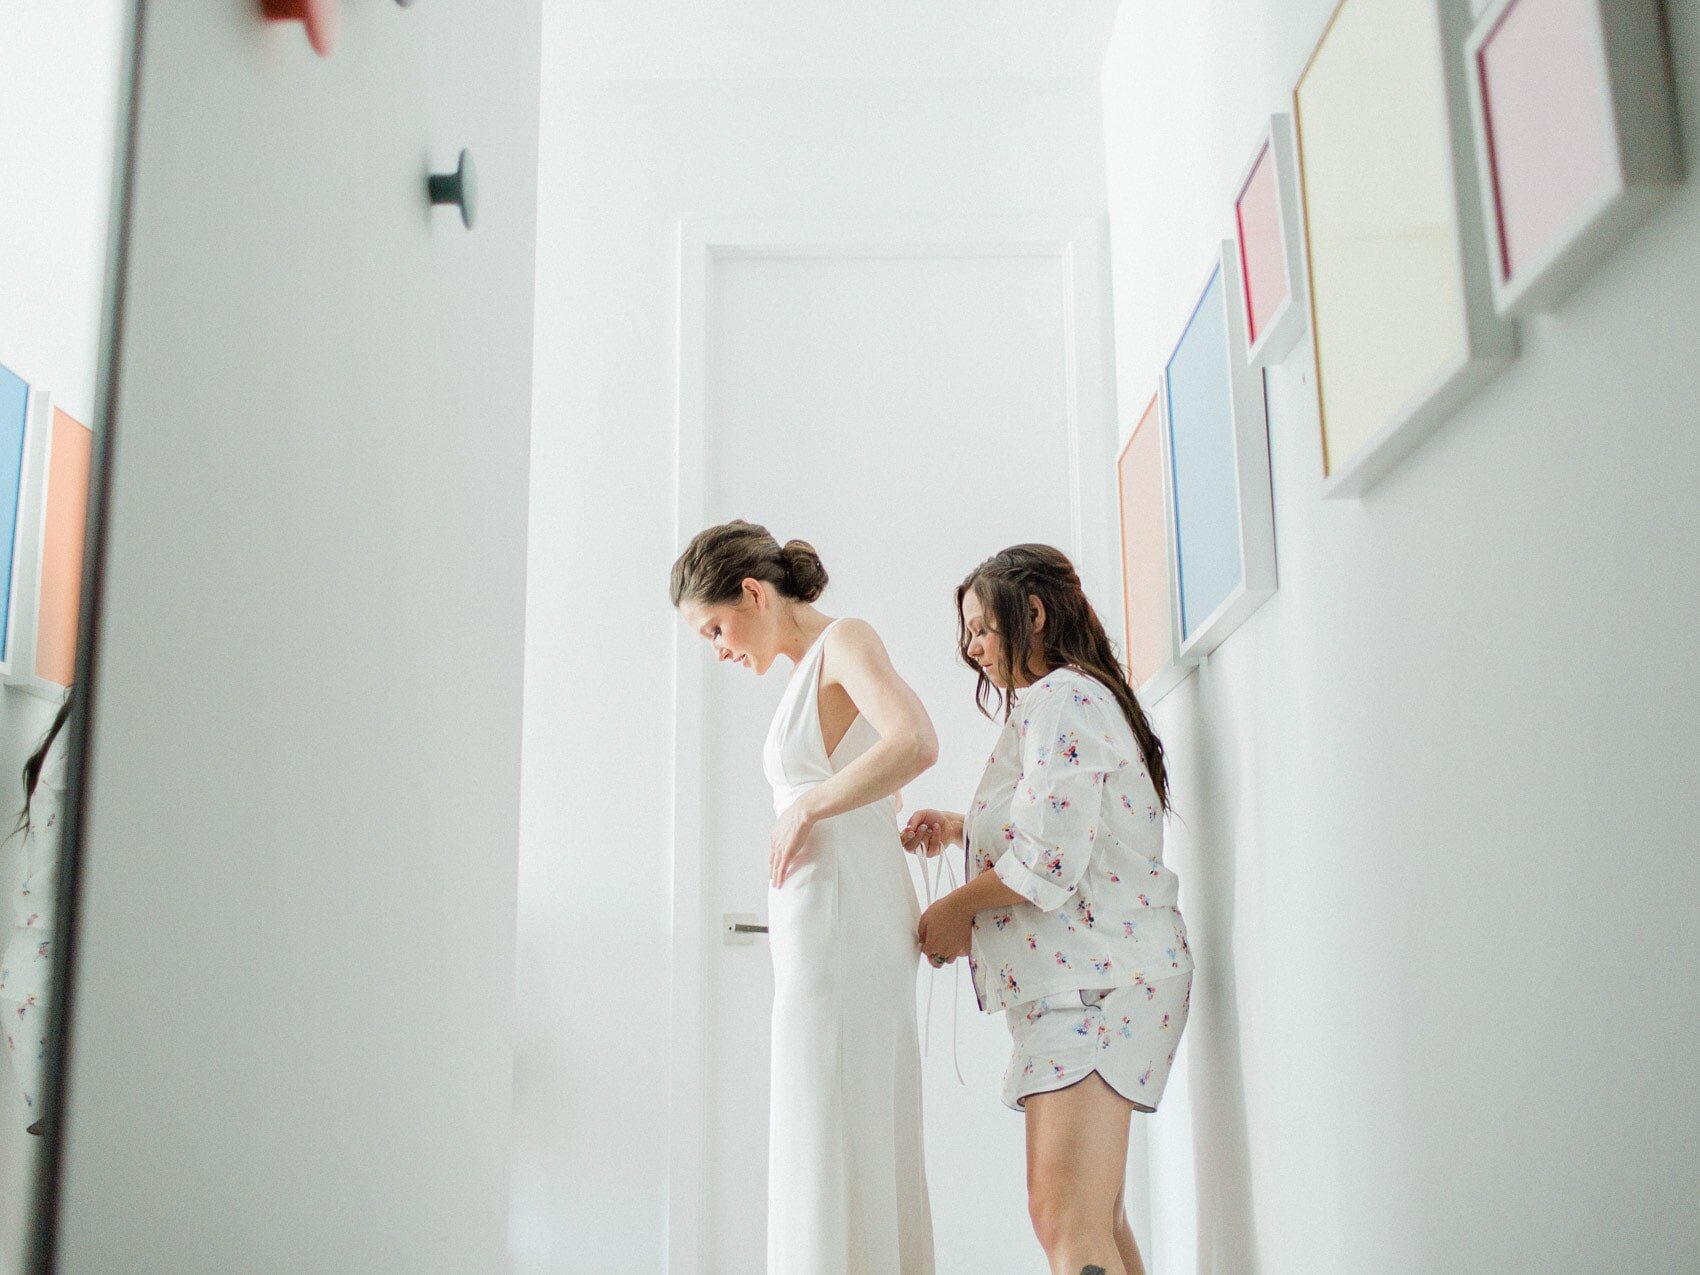 Candid bridal portrait from an intimate downtown toronto wedding at terroni restaurant